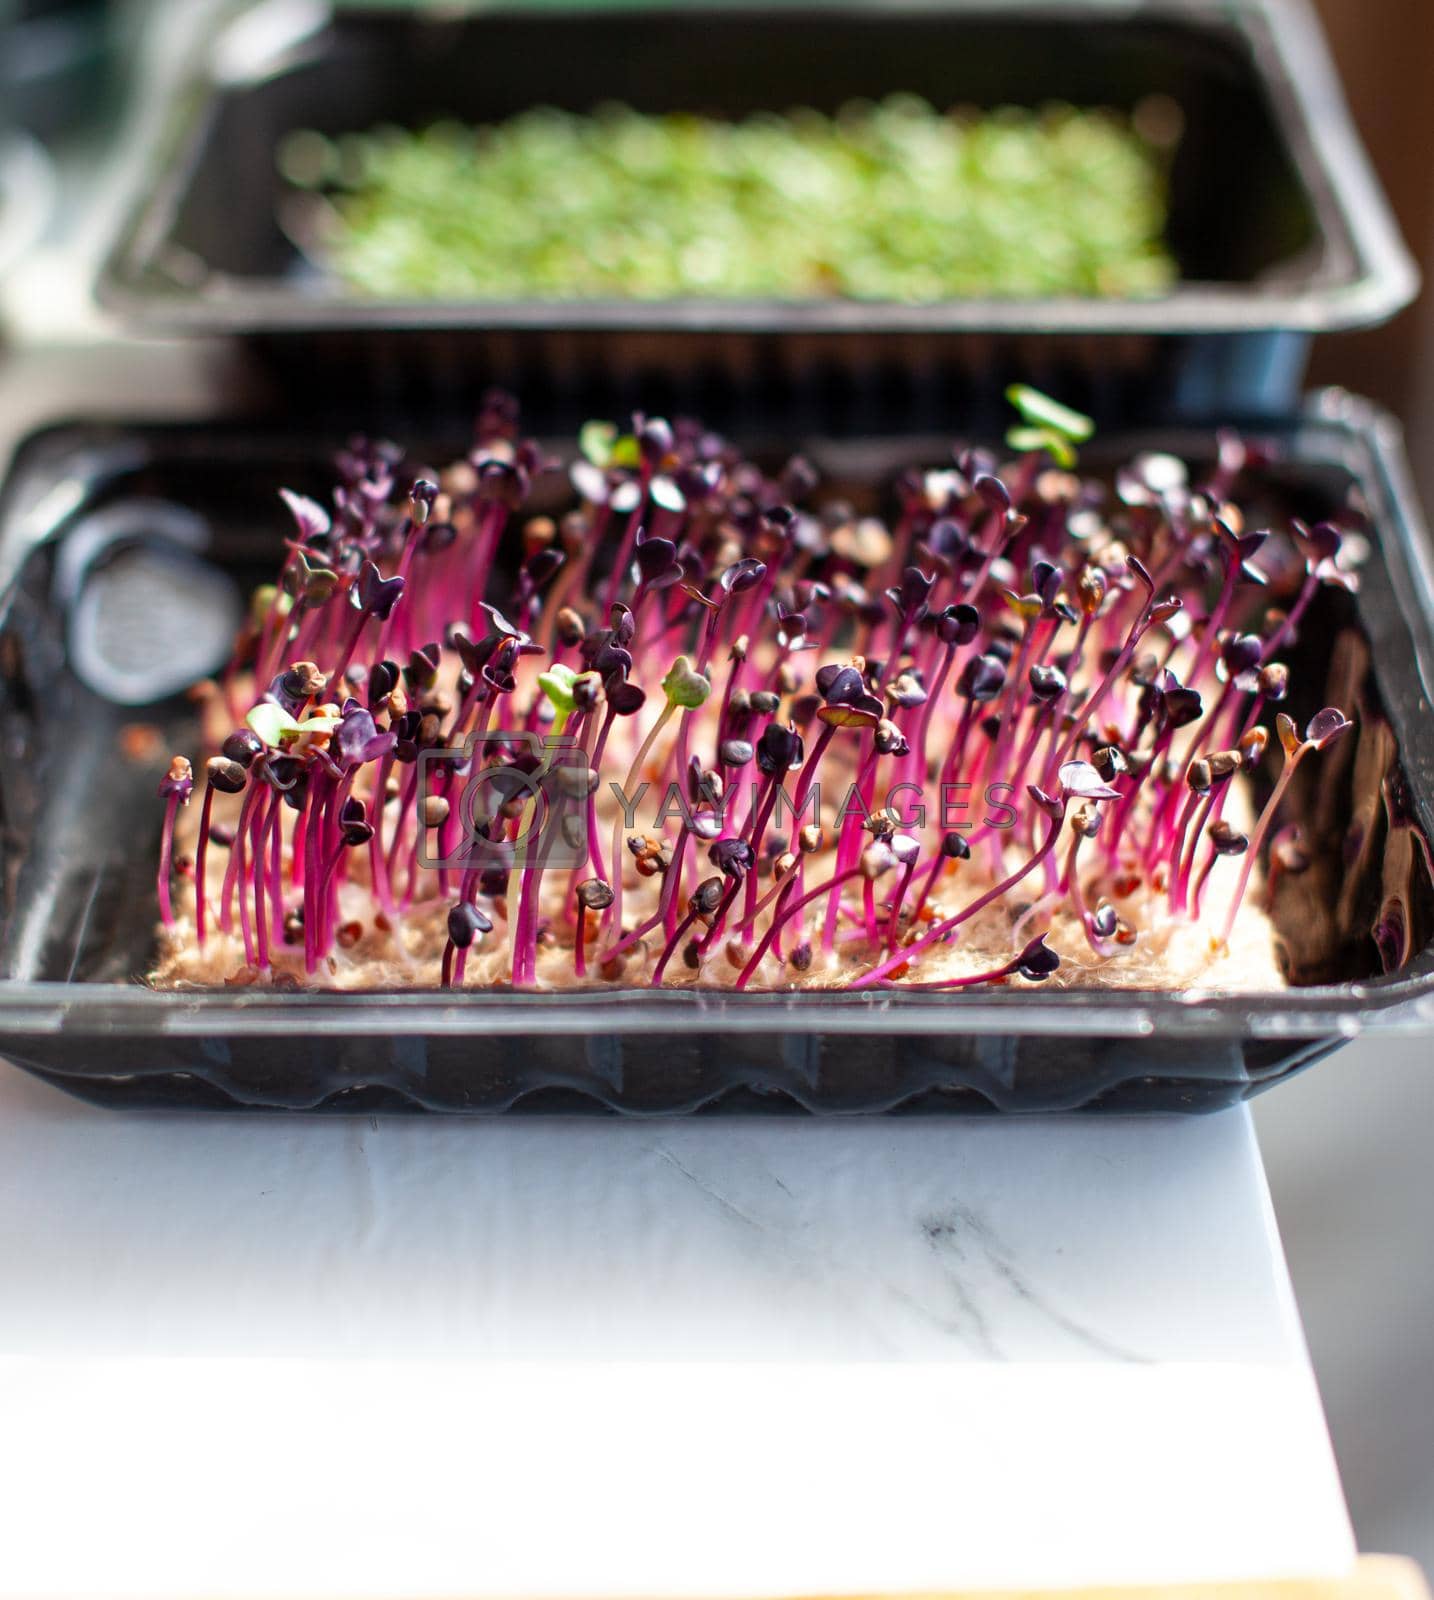 Royalty free image of Purple micro-green radish sprouts in a tray or container. by AnatoliiFoto